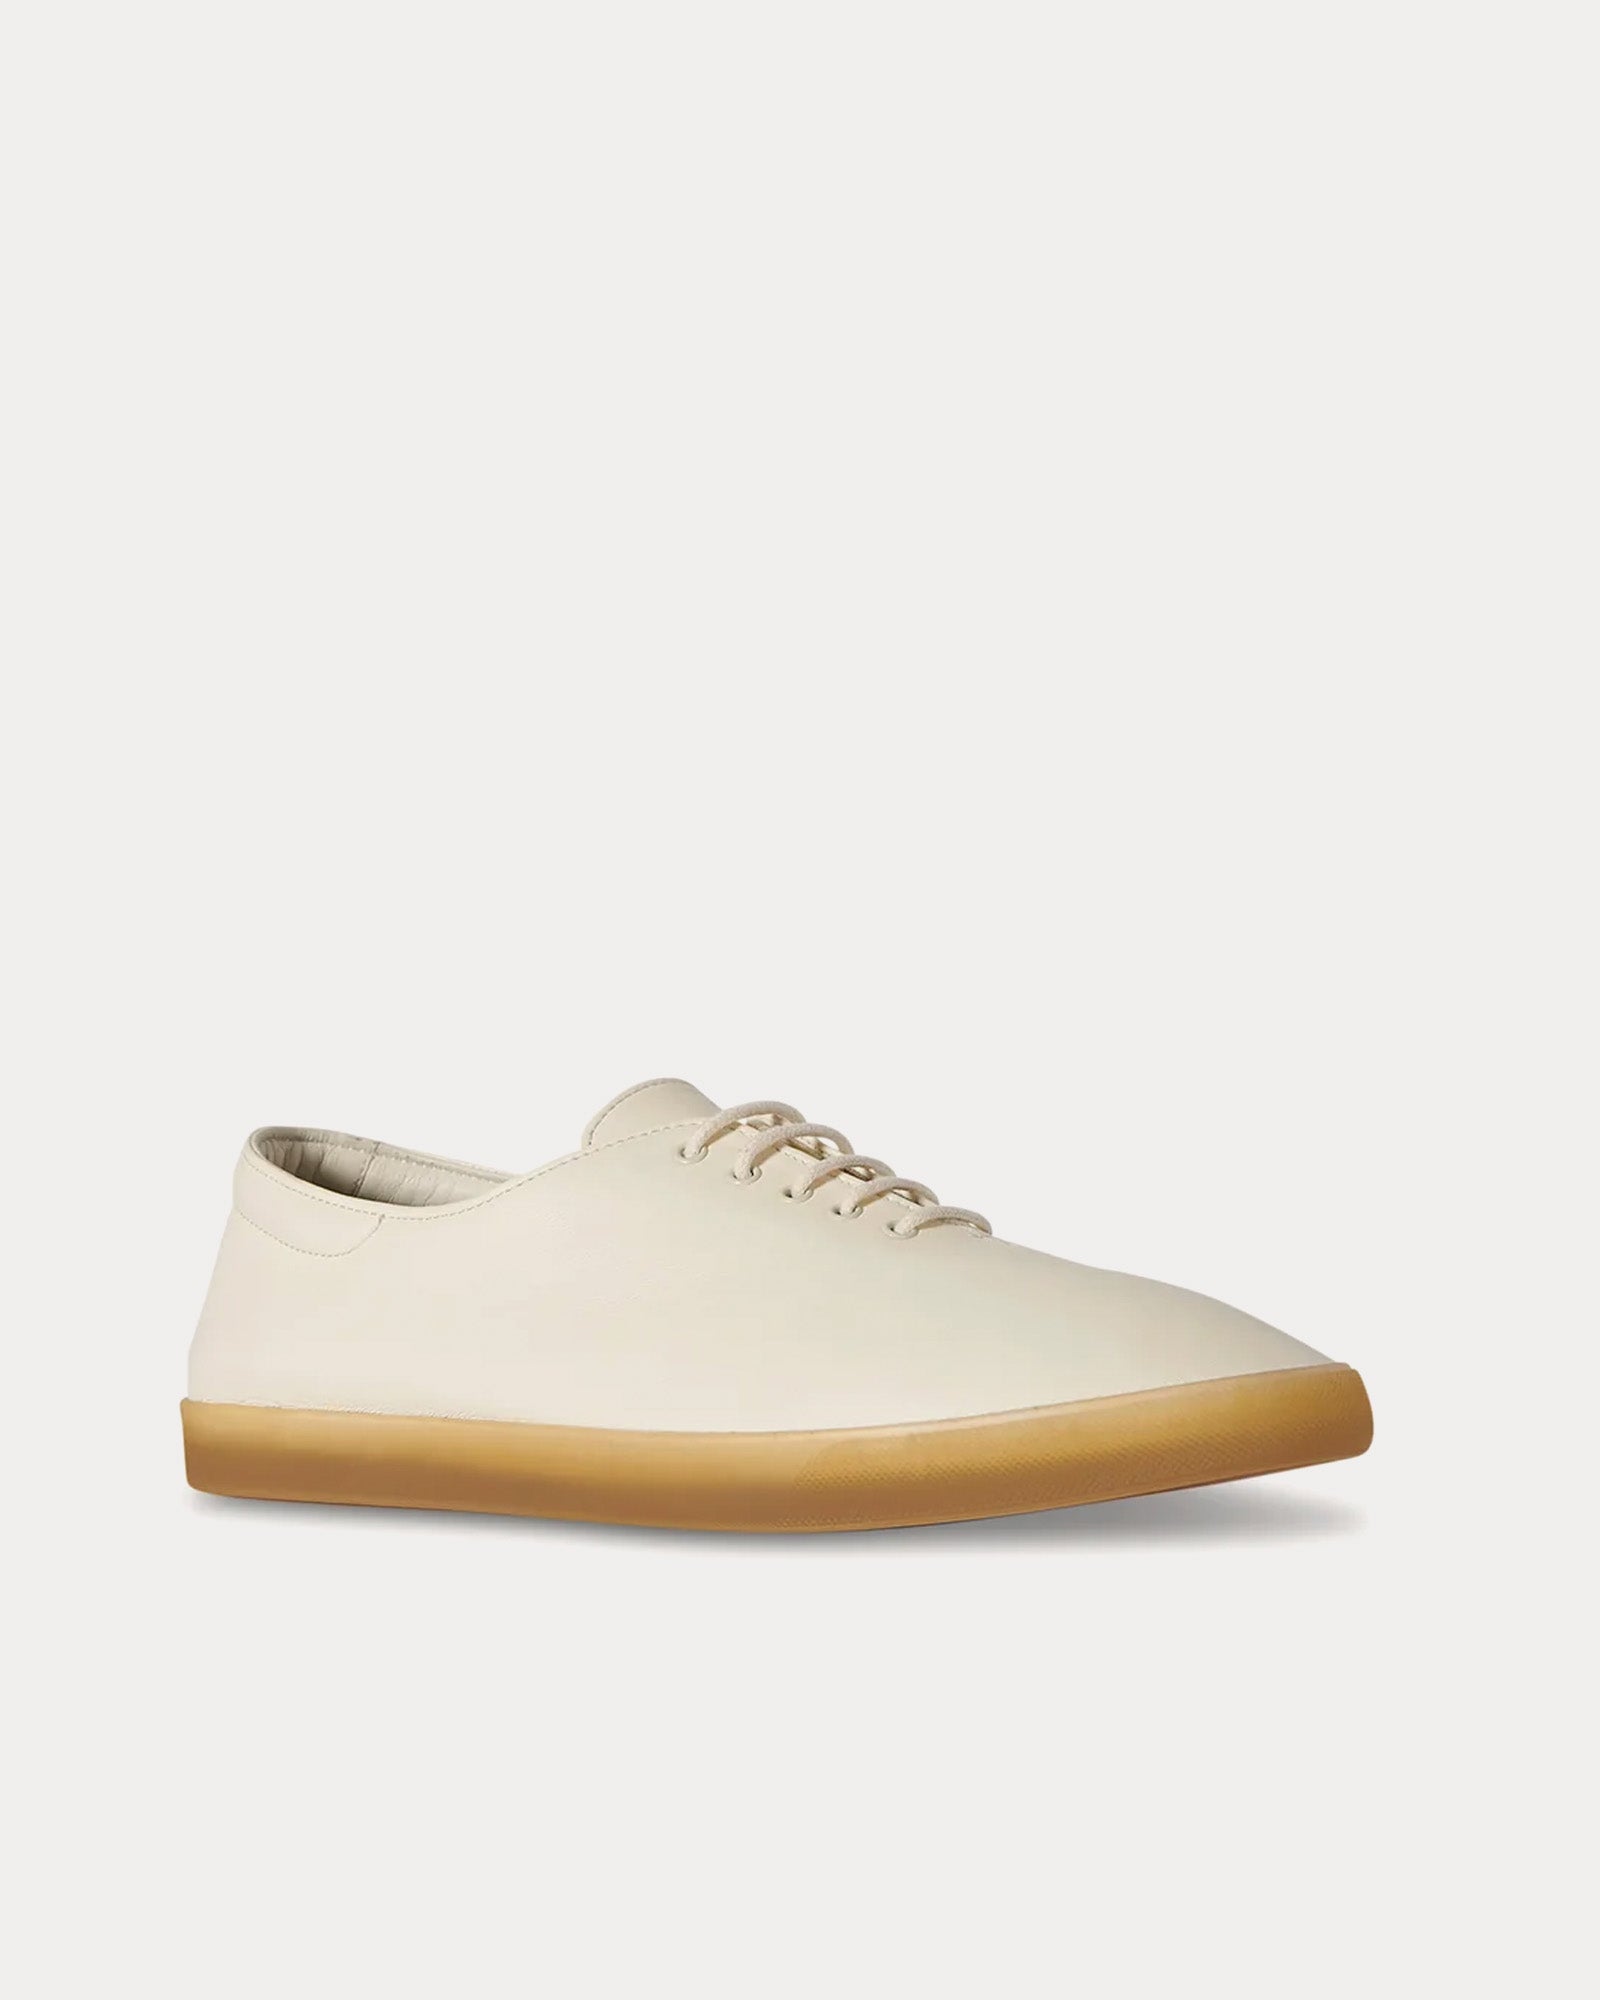 The Row - Sam Leather Creme / Honey Low Top Sneakers